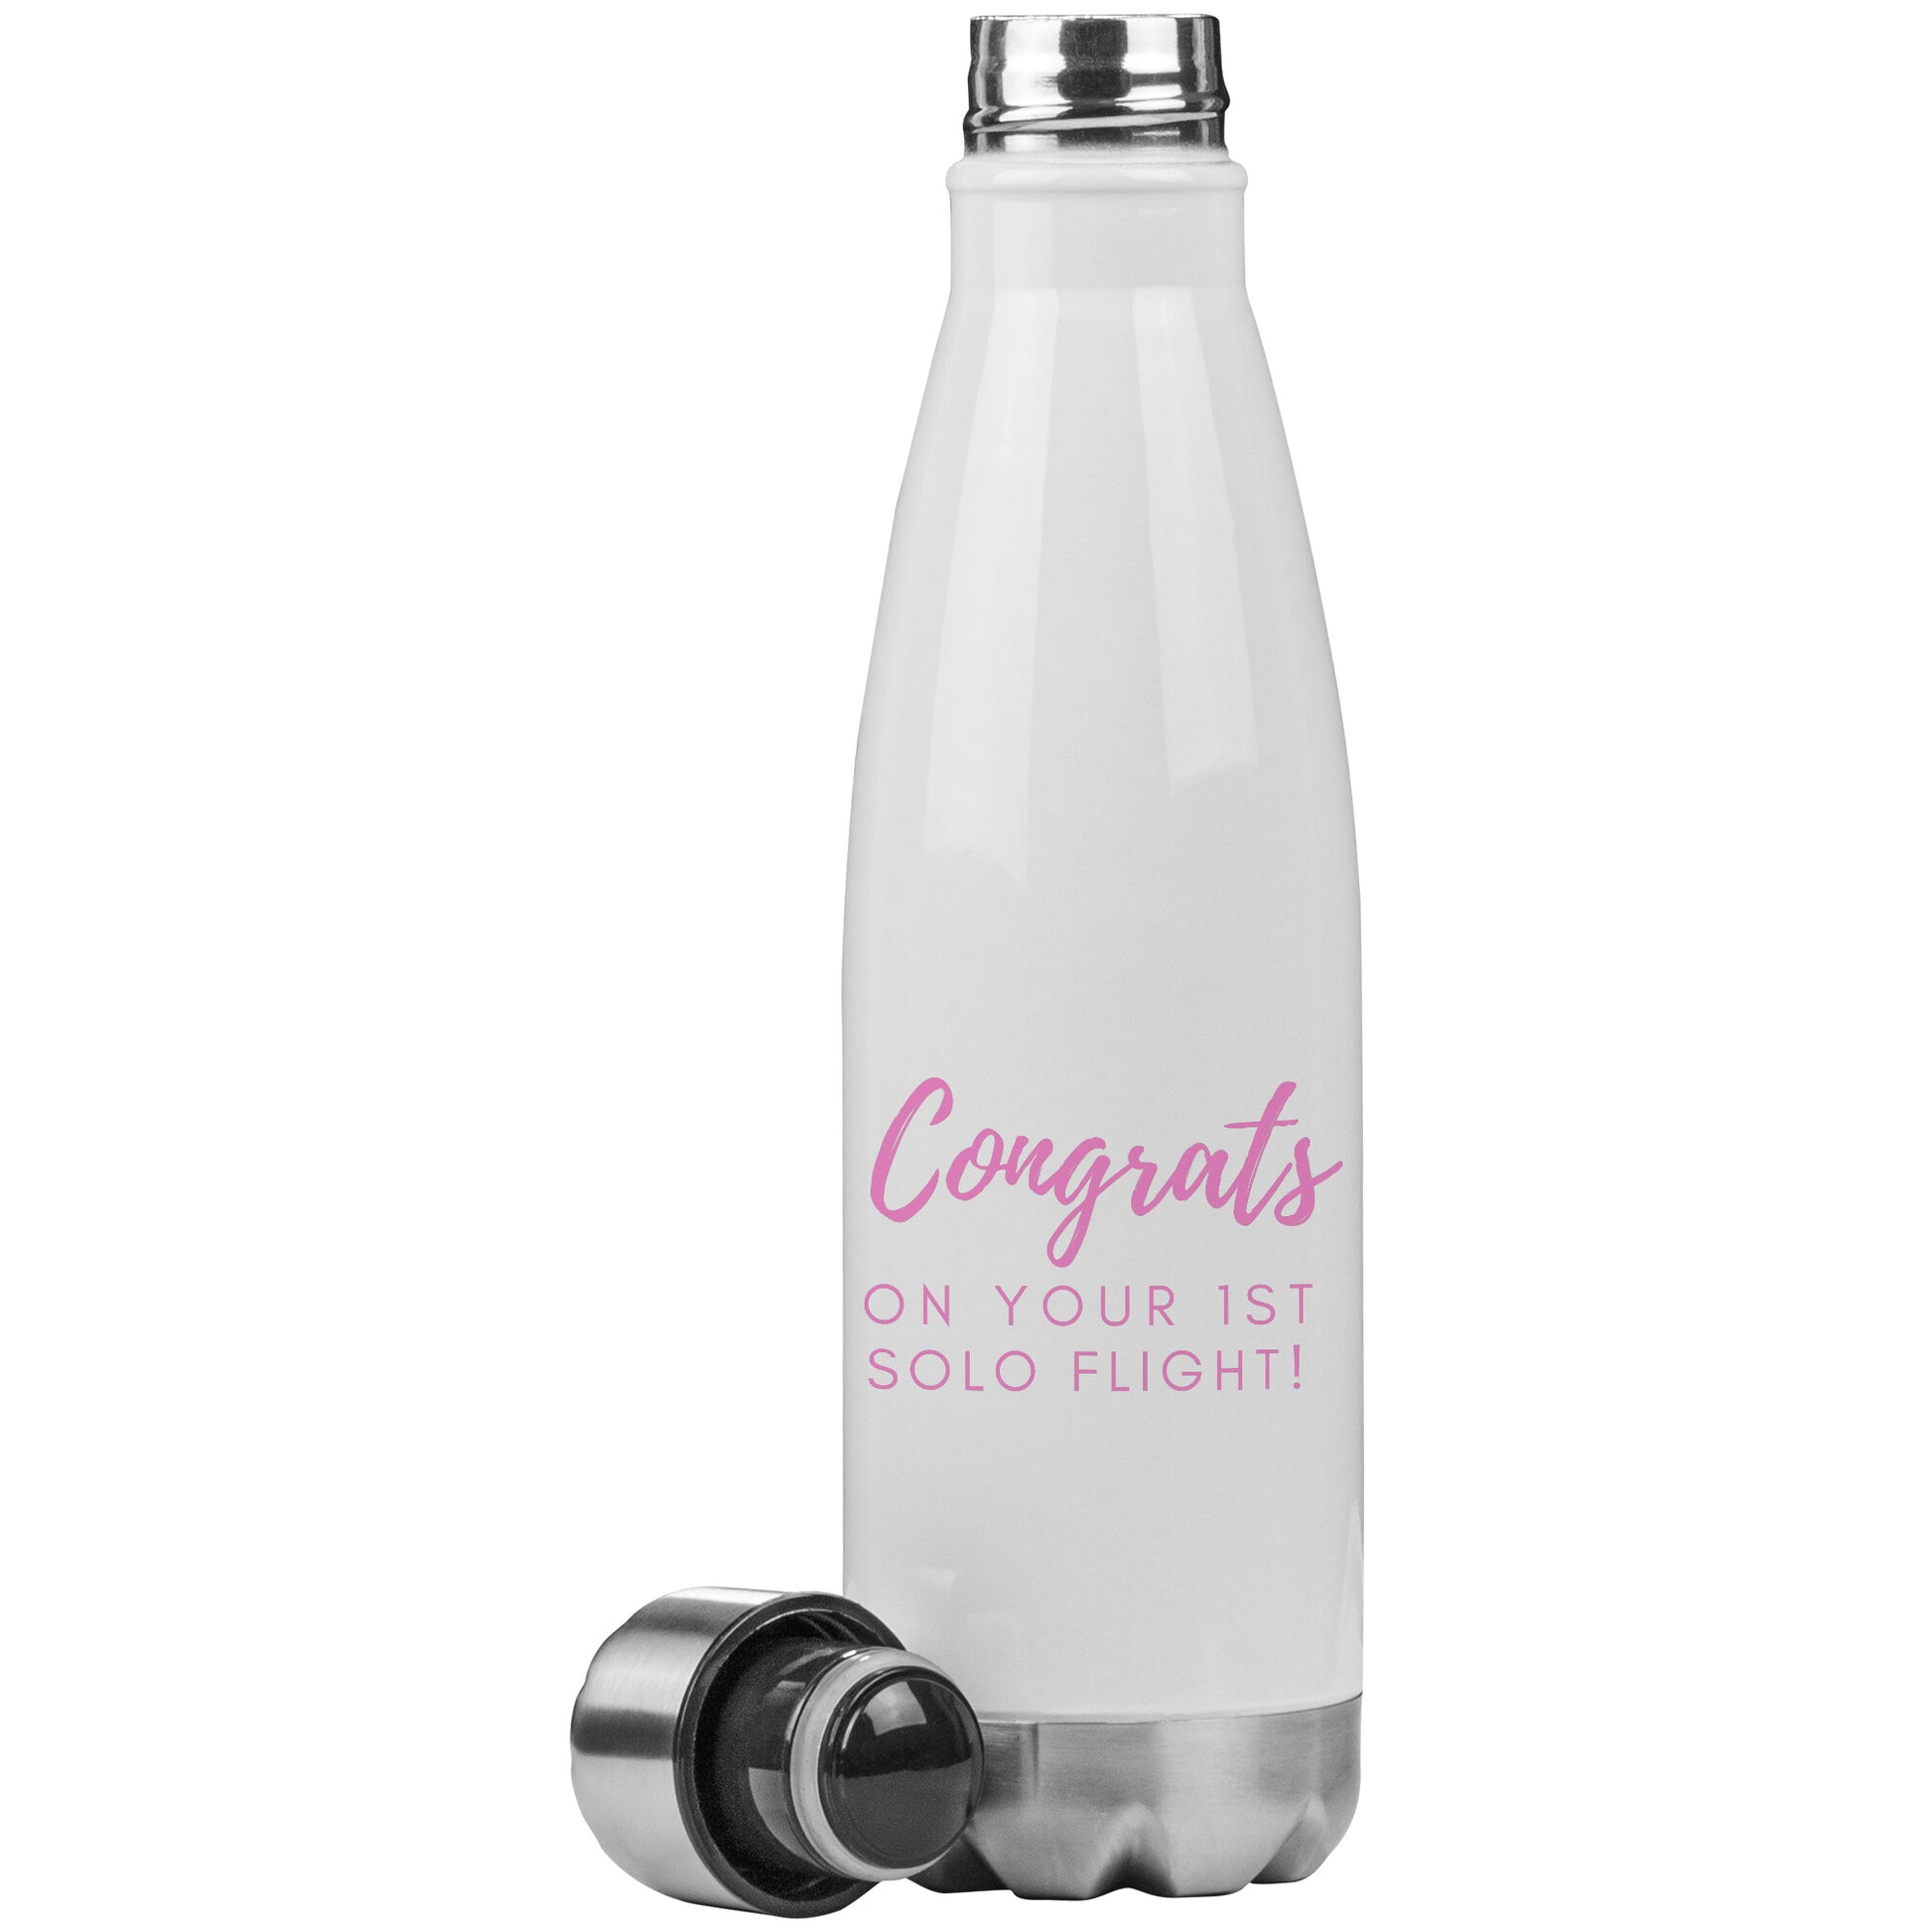 Congrats on your first solo flight! - 20oz stainless steel water bottle with pink text